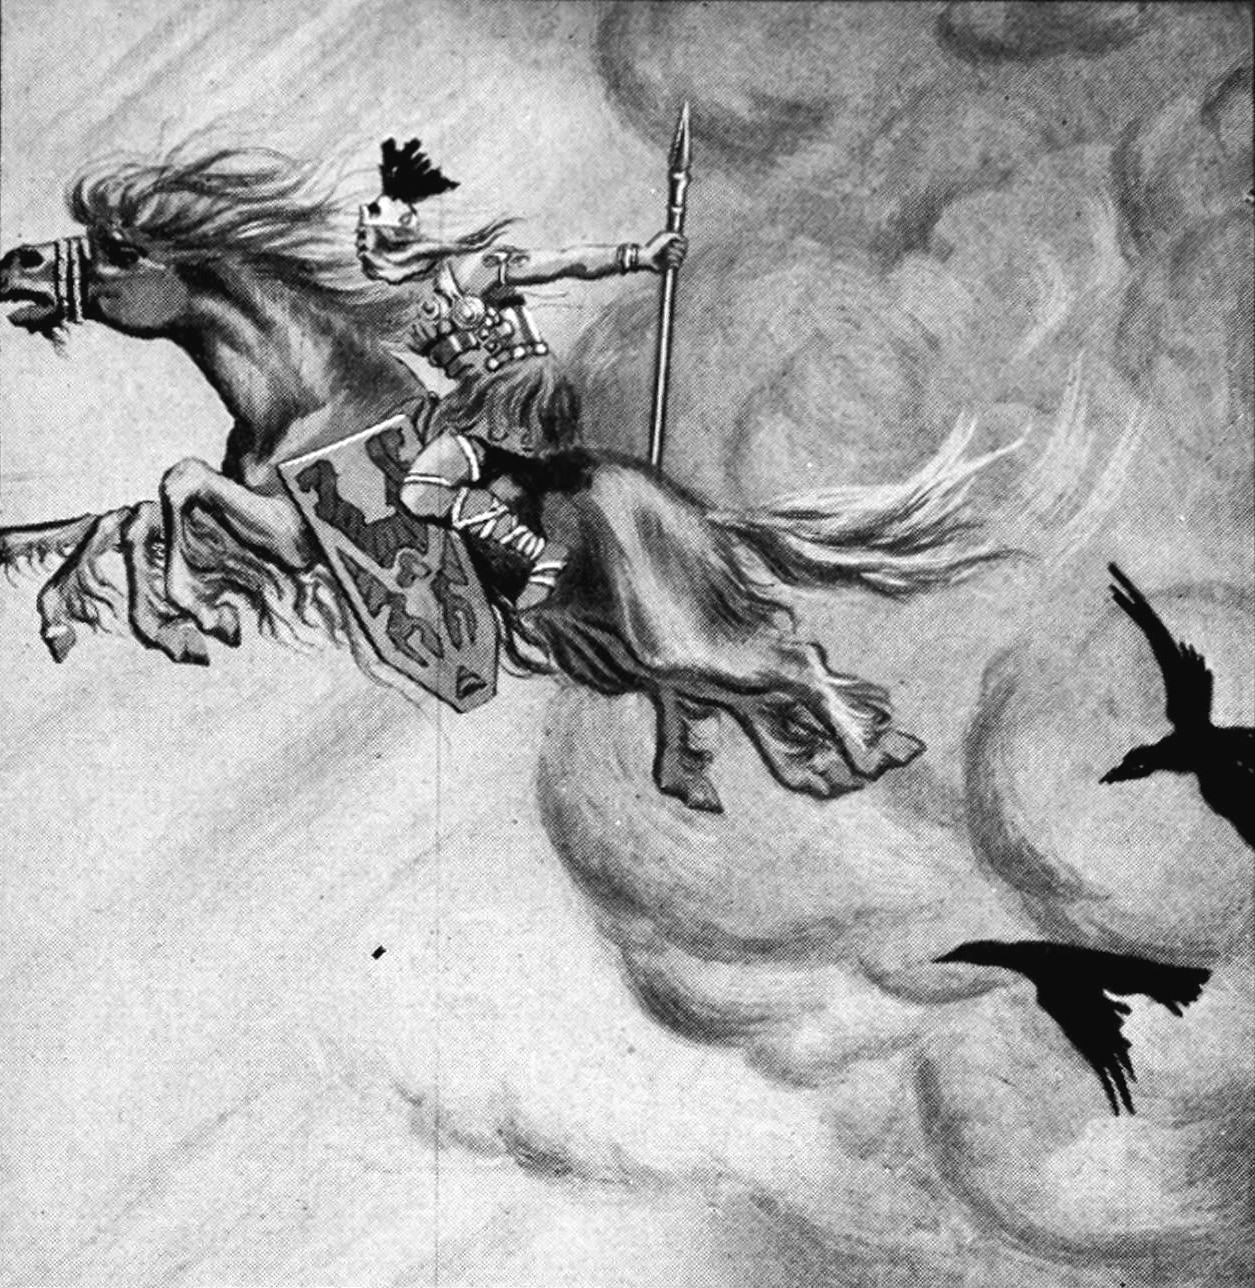 A knight riding a horse into a grey mist